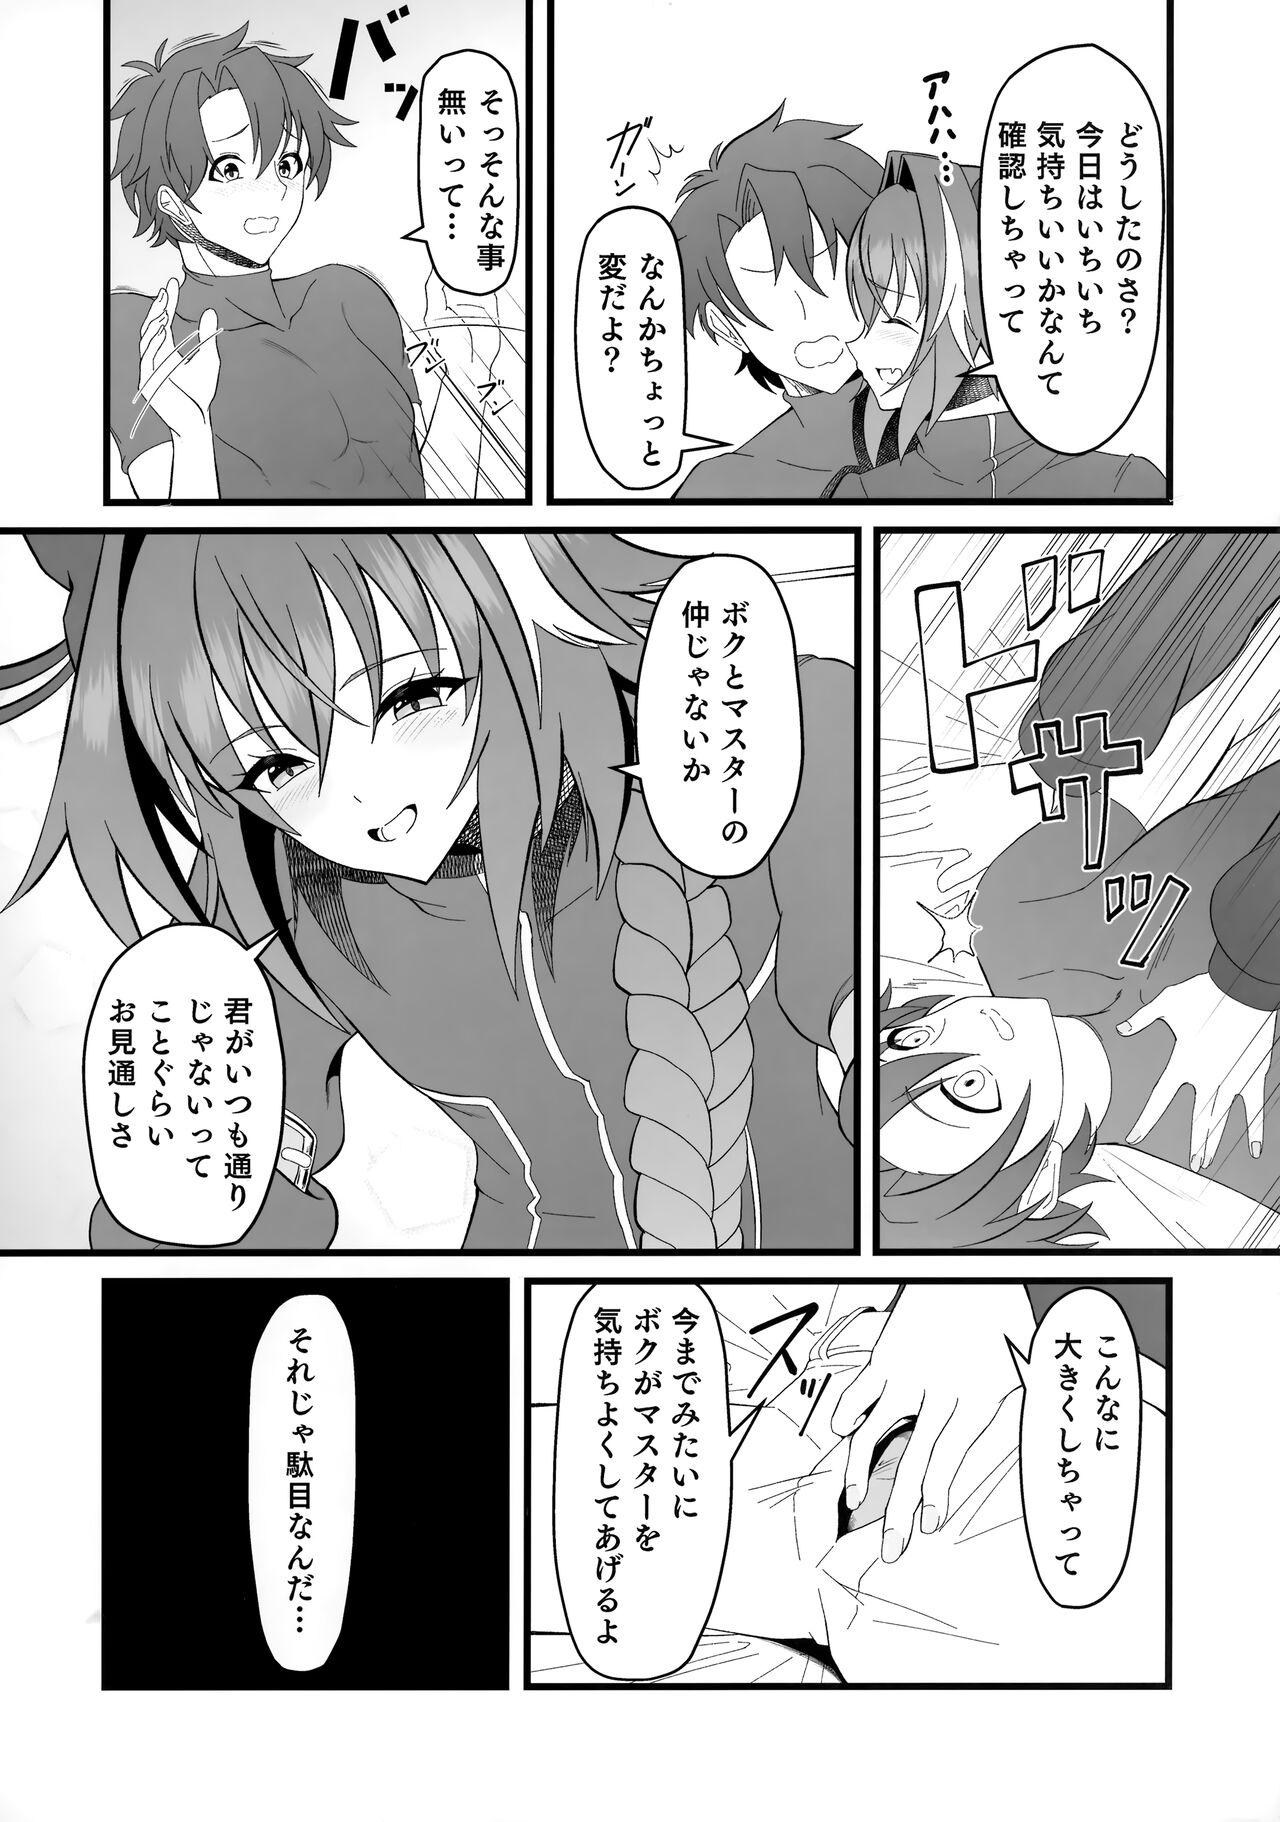 Family Porn Kimi no Ichiban ni Naritakute - I wanted to be your number one. - Fate grand order Bang Bros - Page 7